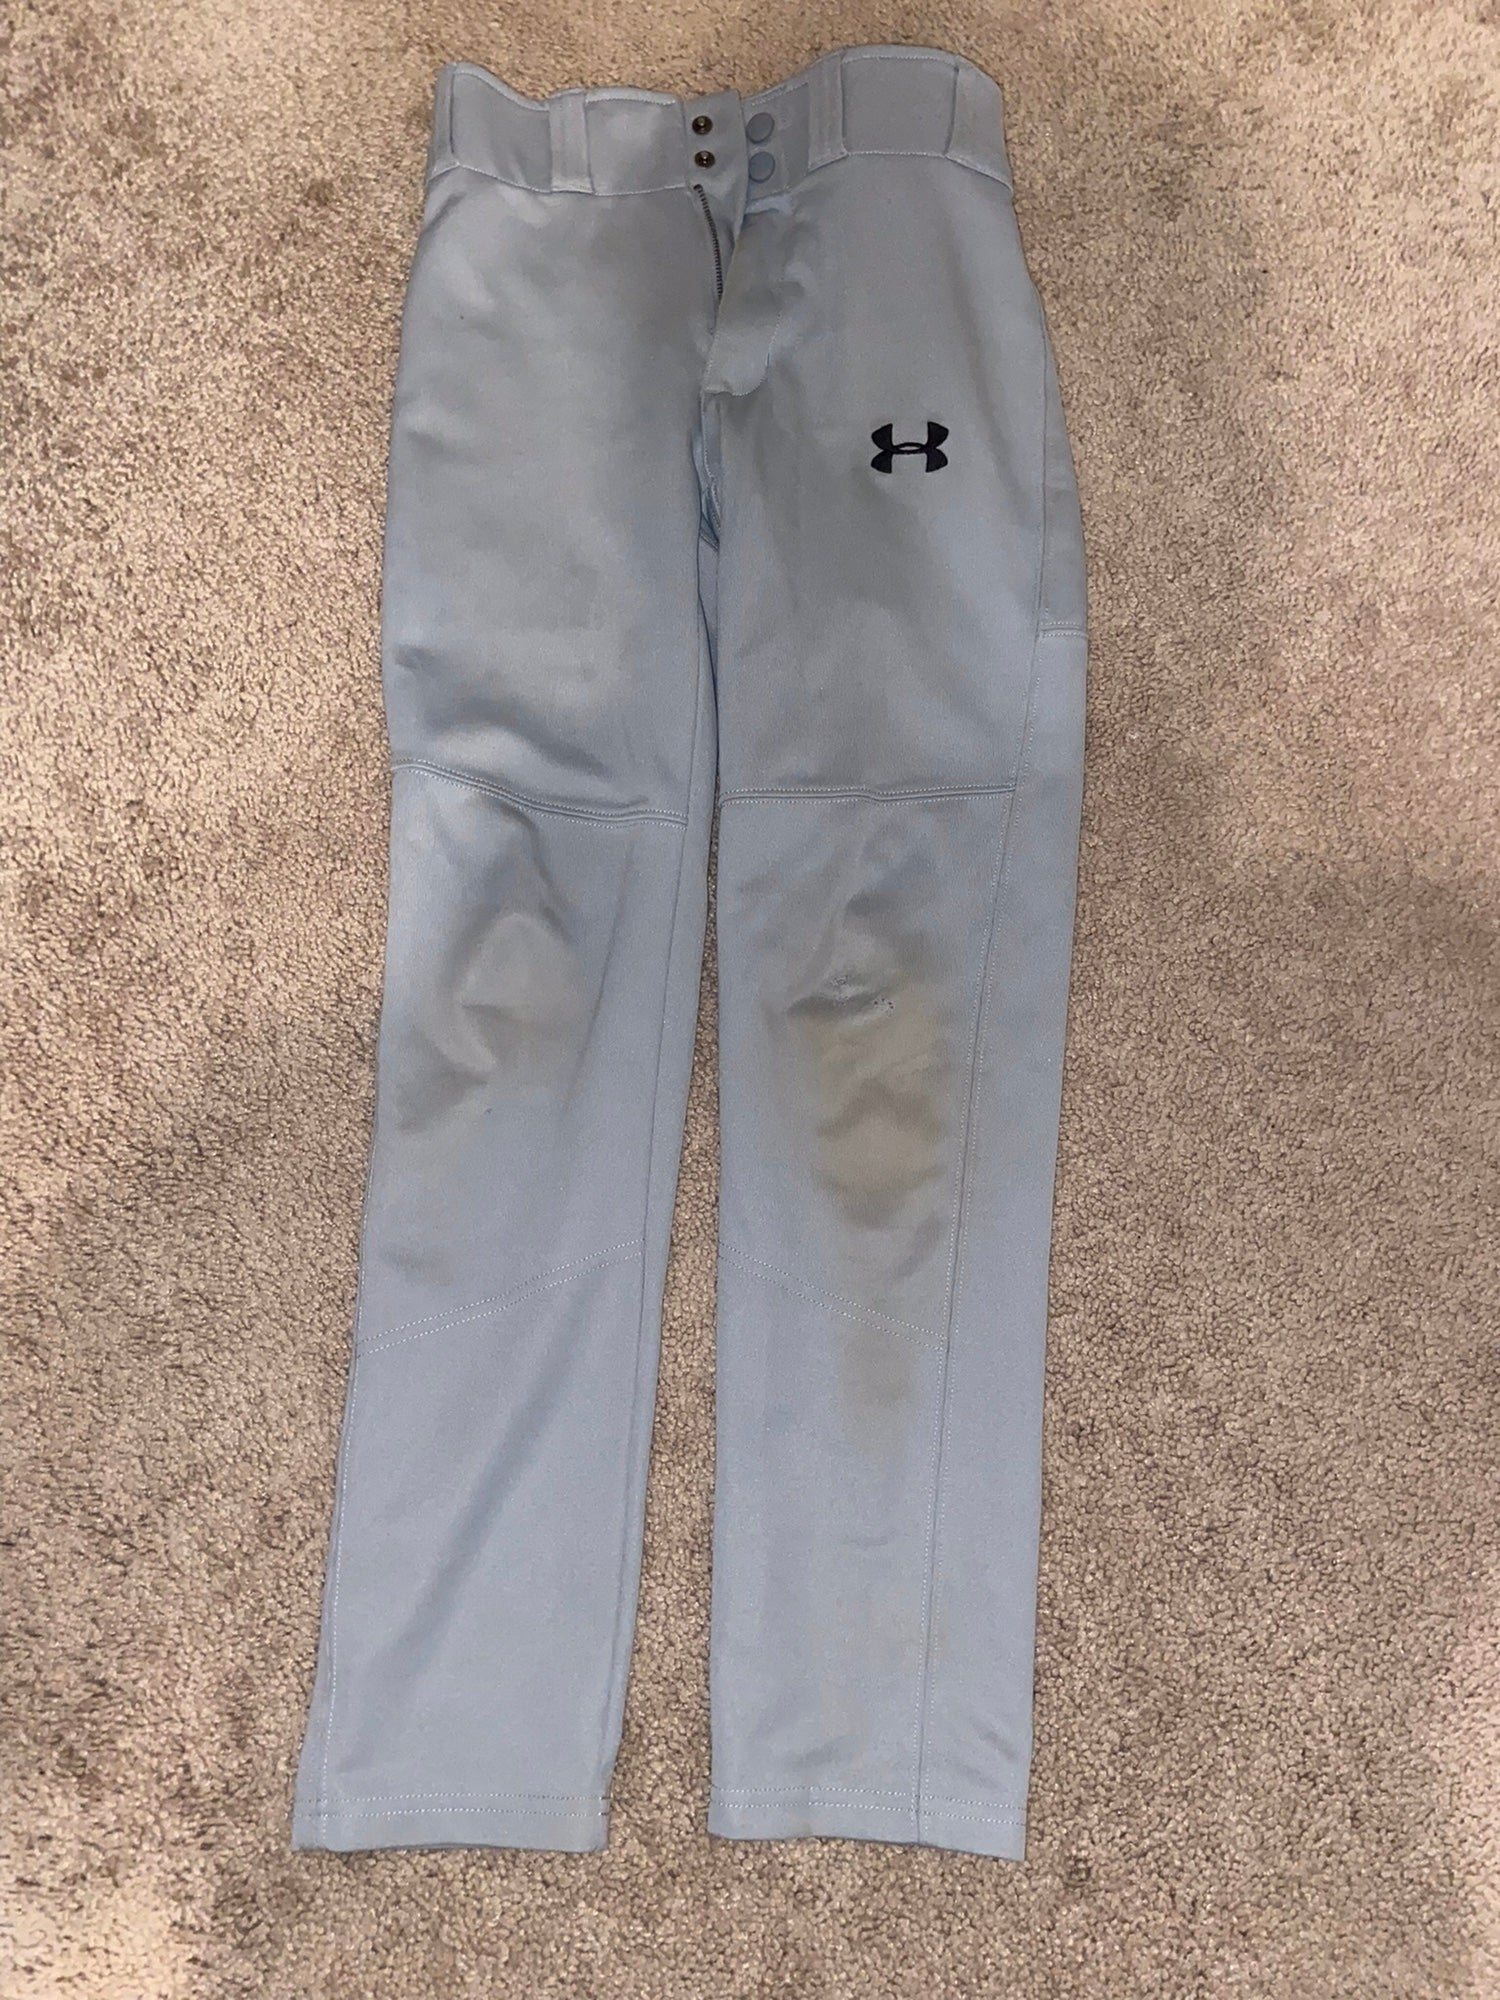 Details about   UNDER ARMOUR ― Womens XS ― FITTED Gray Baseball Pants NWT #232B *NEW Extra Small 